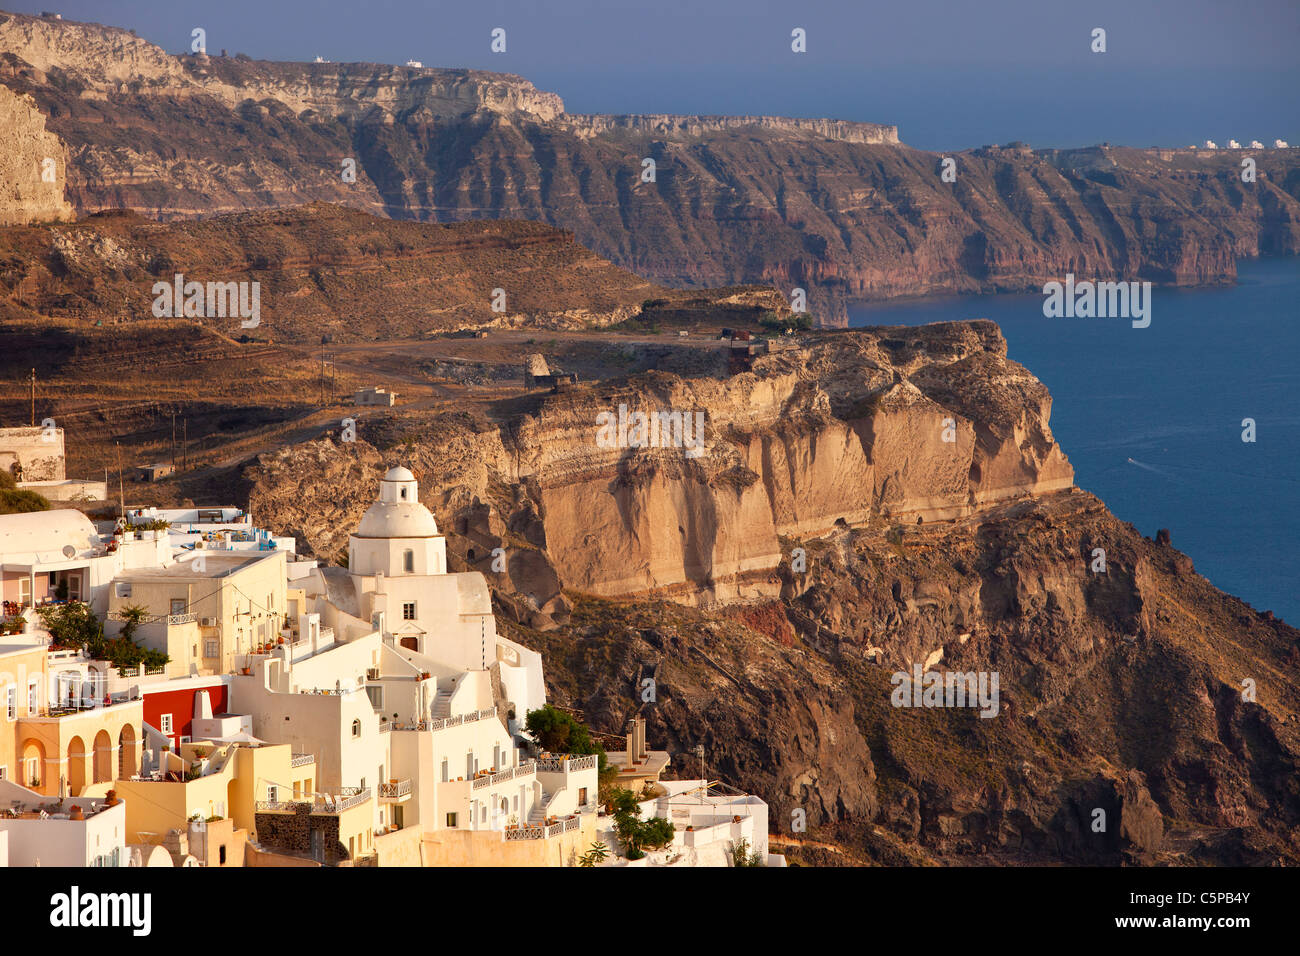 Town of Thira (Fira) along the rocky cliffs of Santorini, the Cyclades Greece Stock Photo